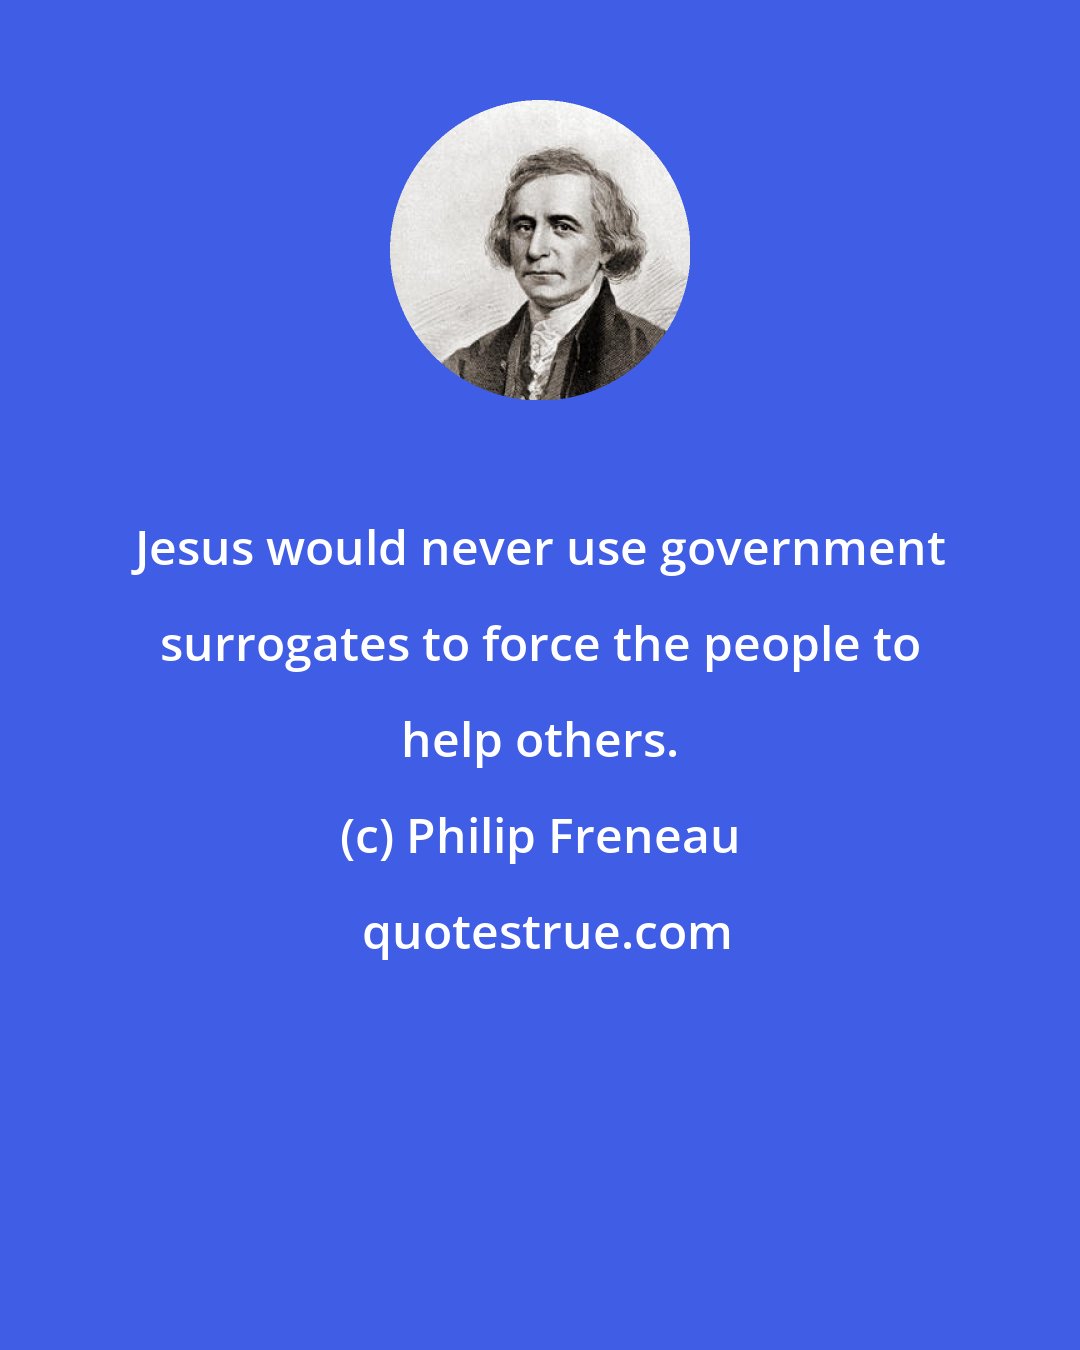 Philip Freneau: Jesus would never use government surrogates to force the people to help others.